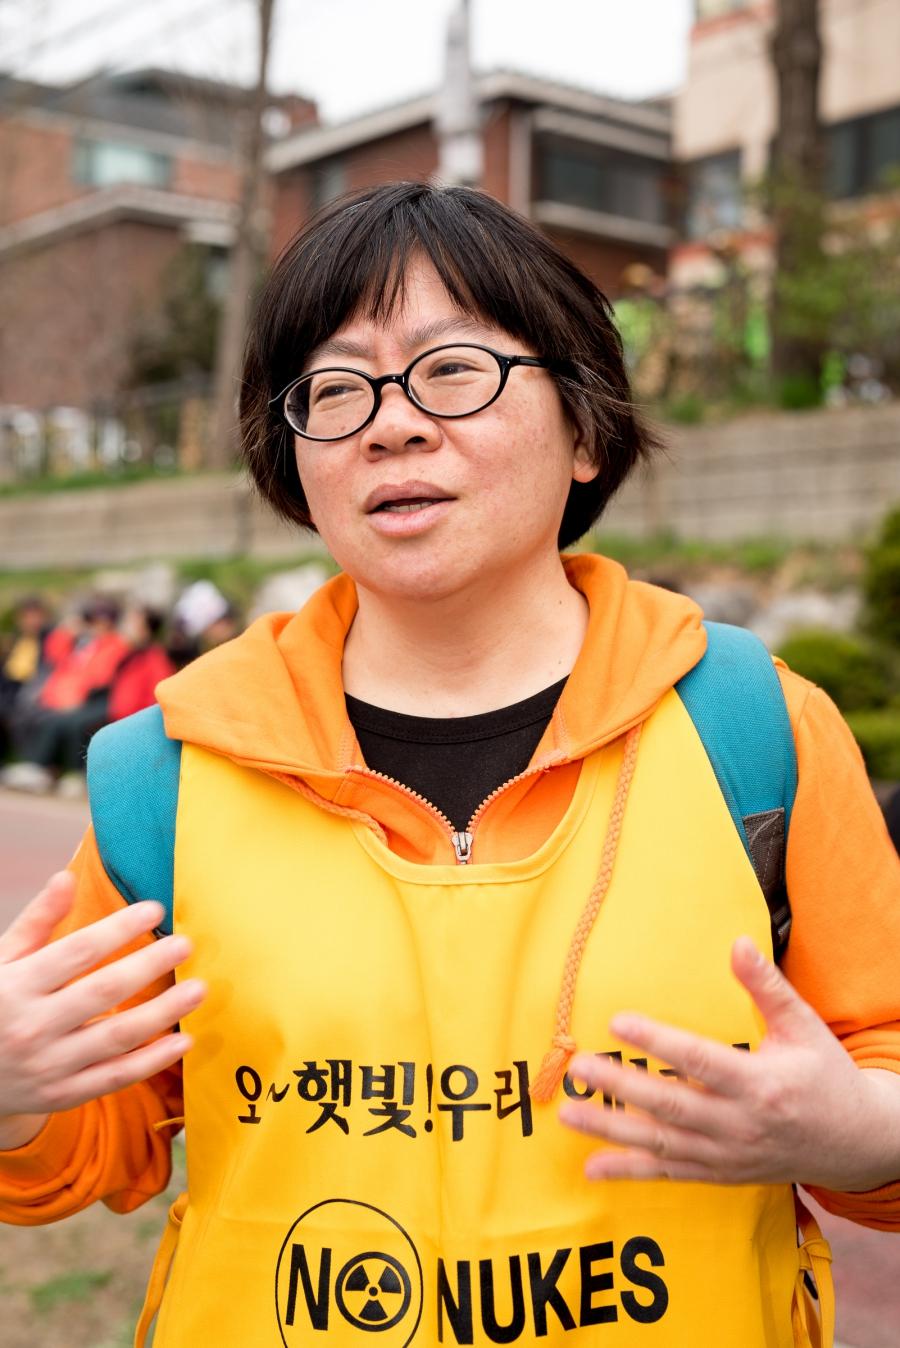 Kim Hyun-choo, who also goes by her Christian name of Maria, says the anti-nuclear campaign wants the South Korean government to stop building new nuclear plants, and close the outdated ones.  